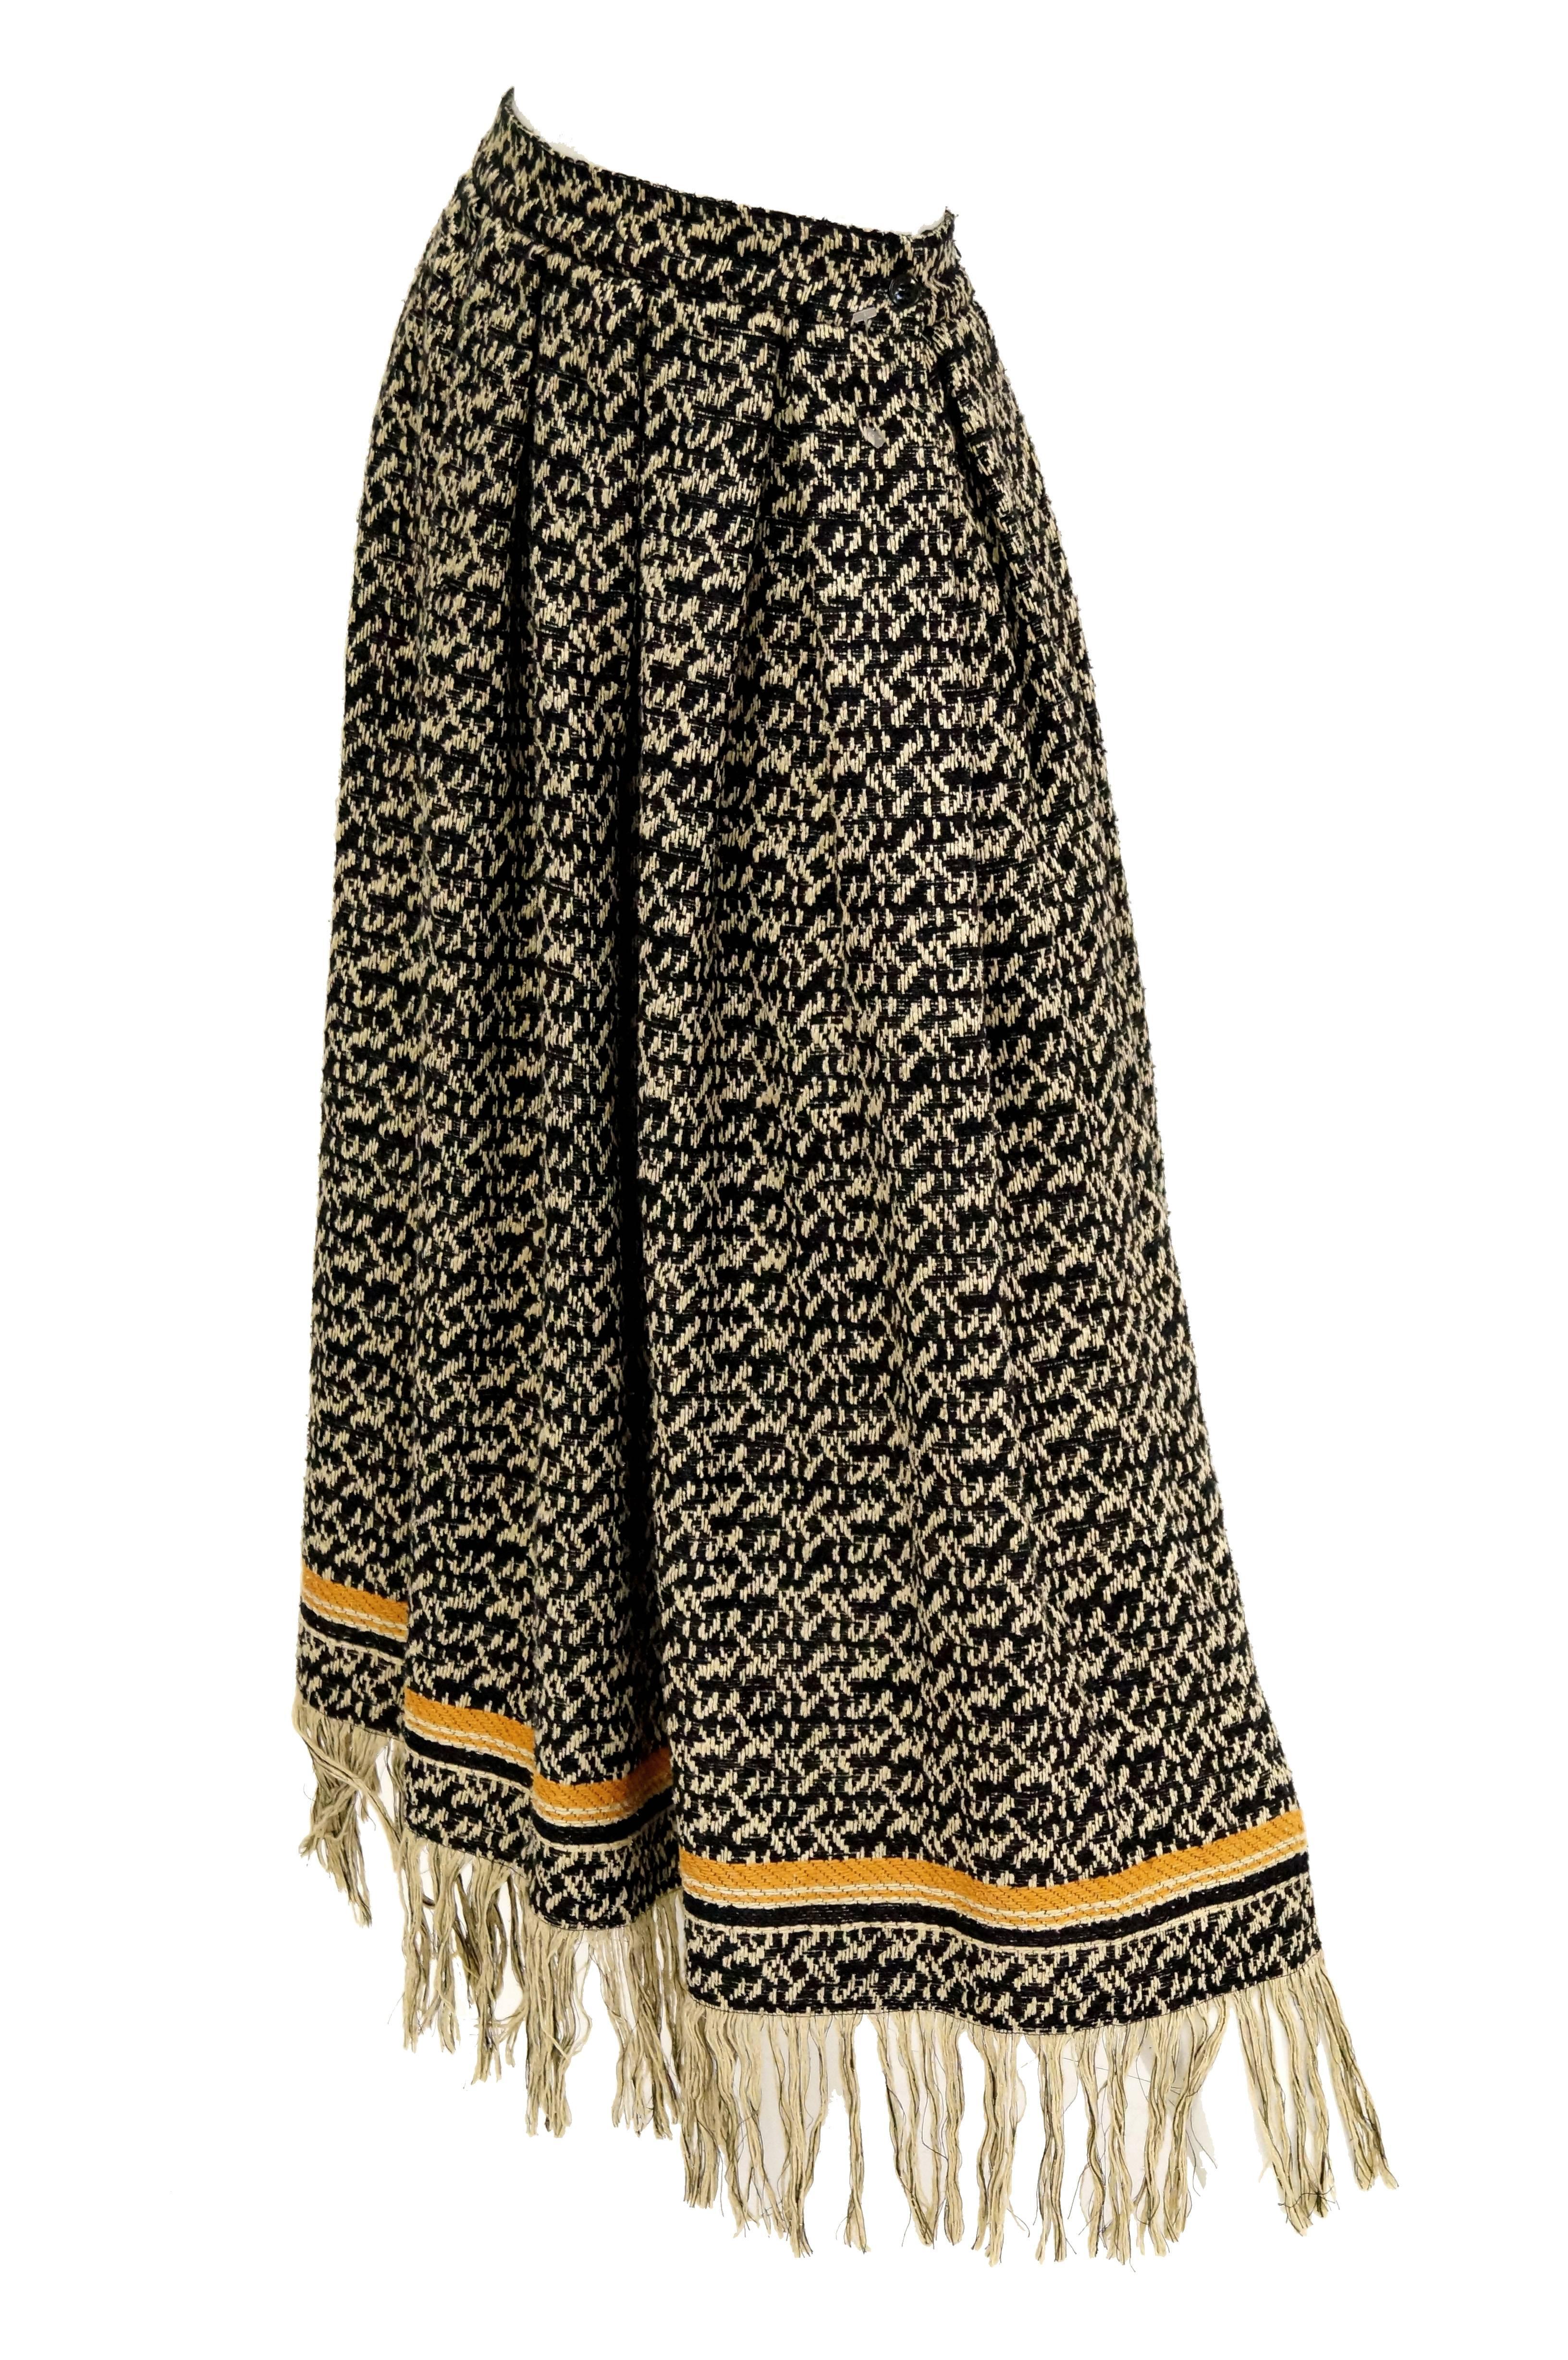 Early 1970s Anne Klein Black and Beige Wool Fringe Skirt and Shawl  14 1